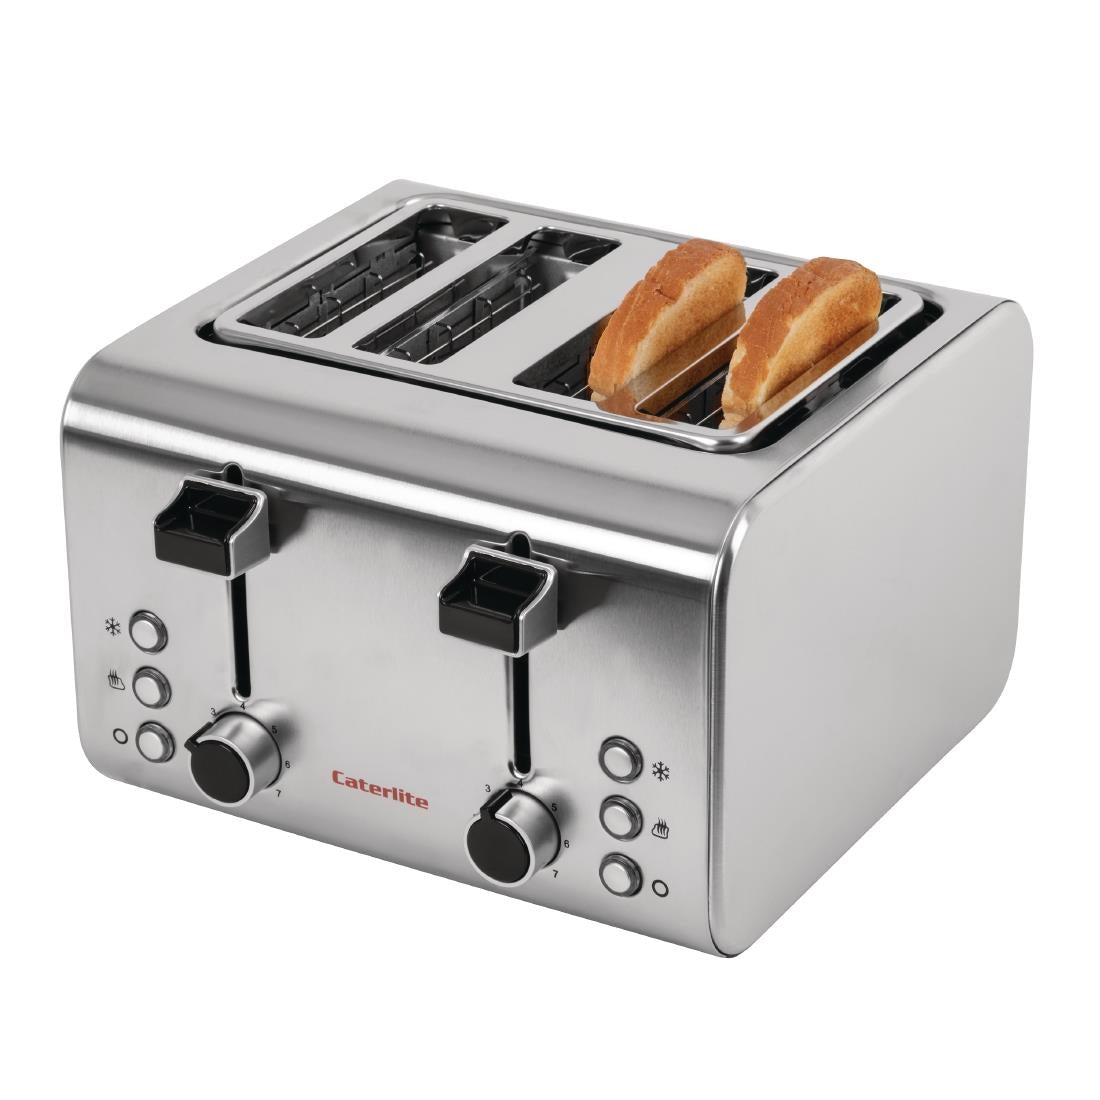 CP929 Caterlite 4 Slot Stainless Steel Toaster JD Catering Equipment Solutions Ltd